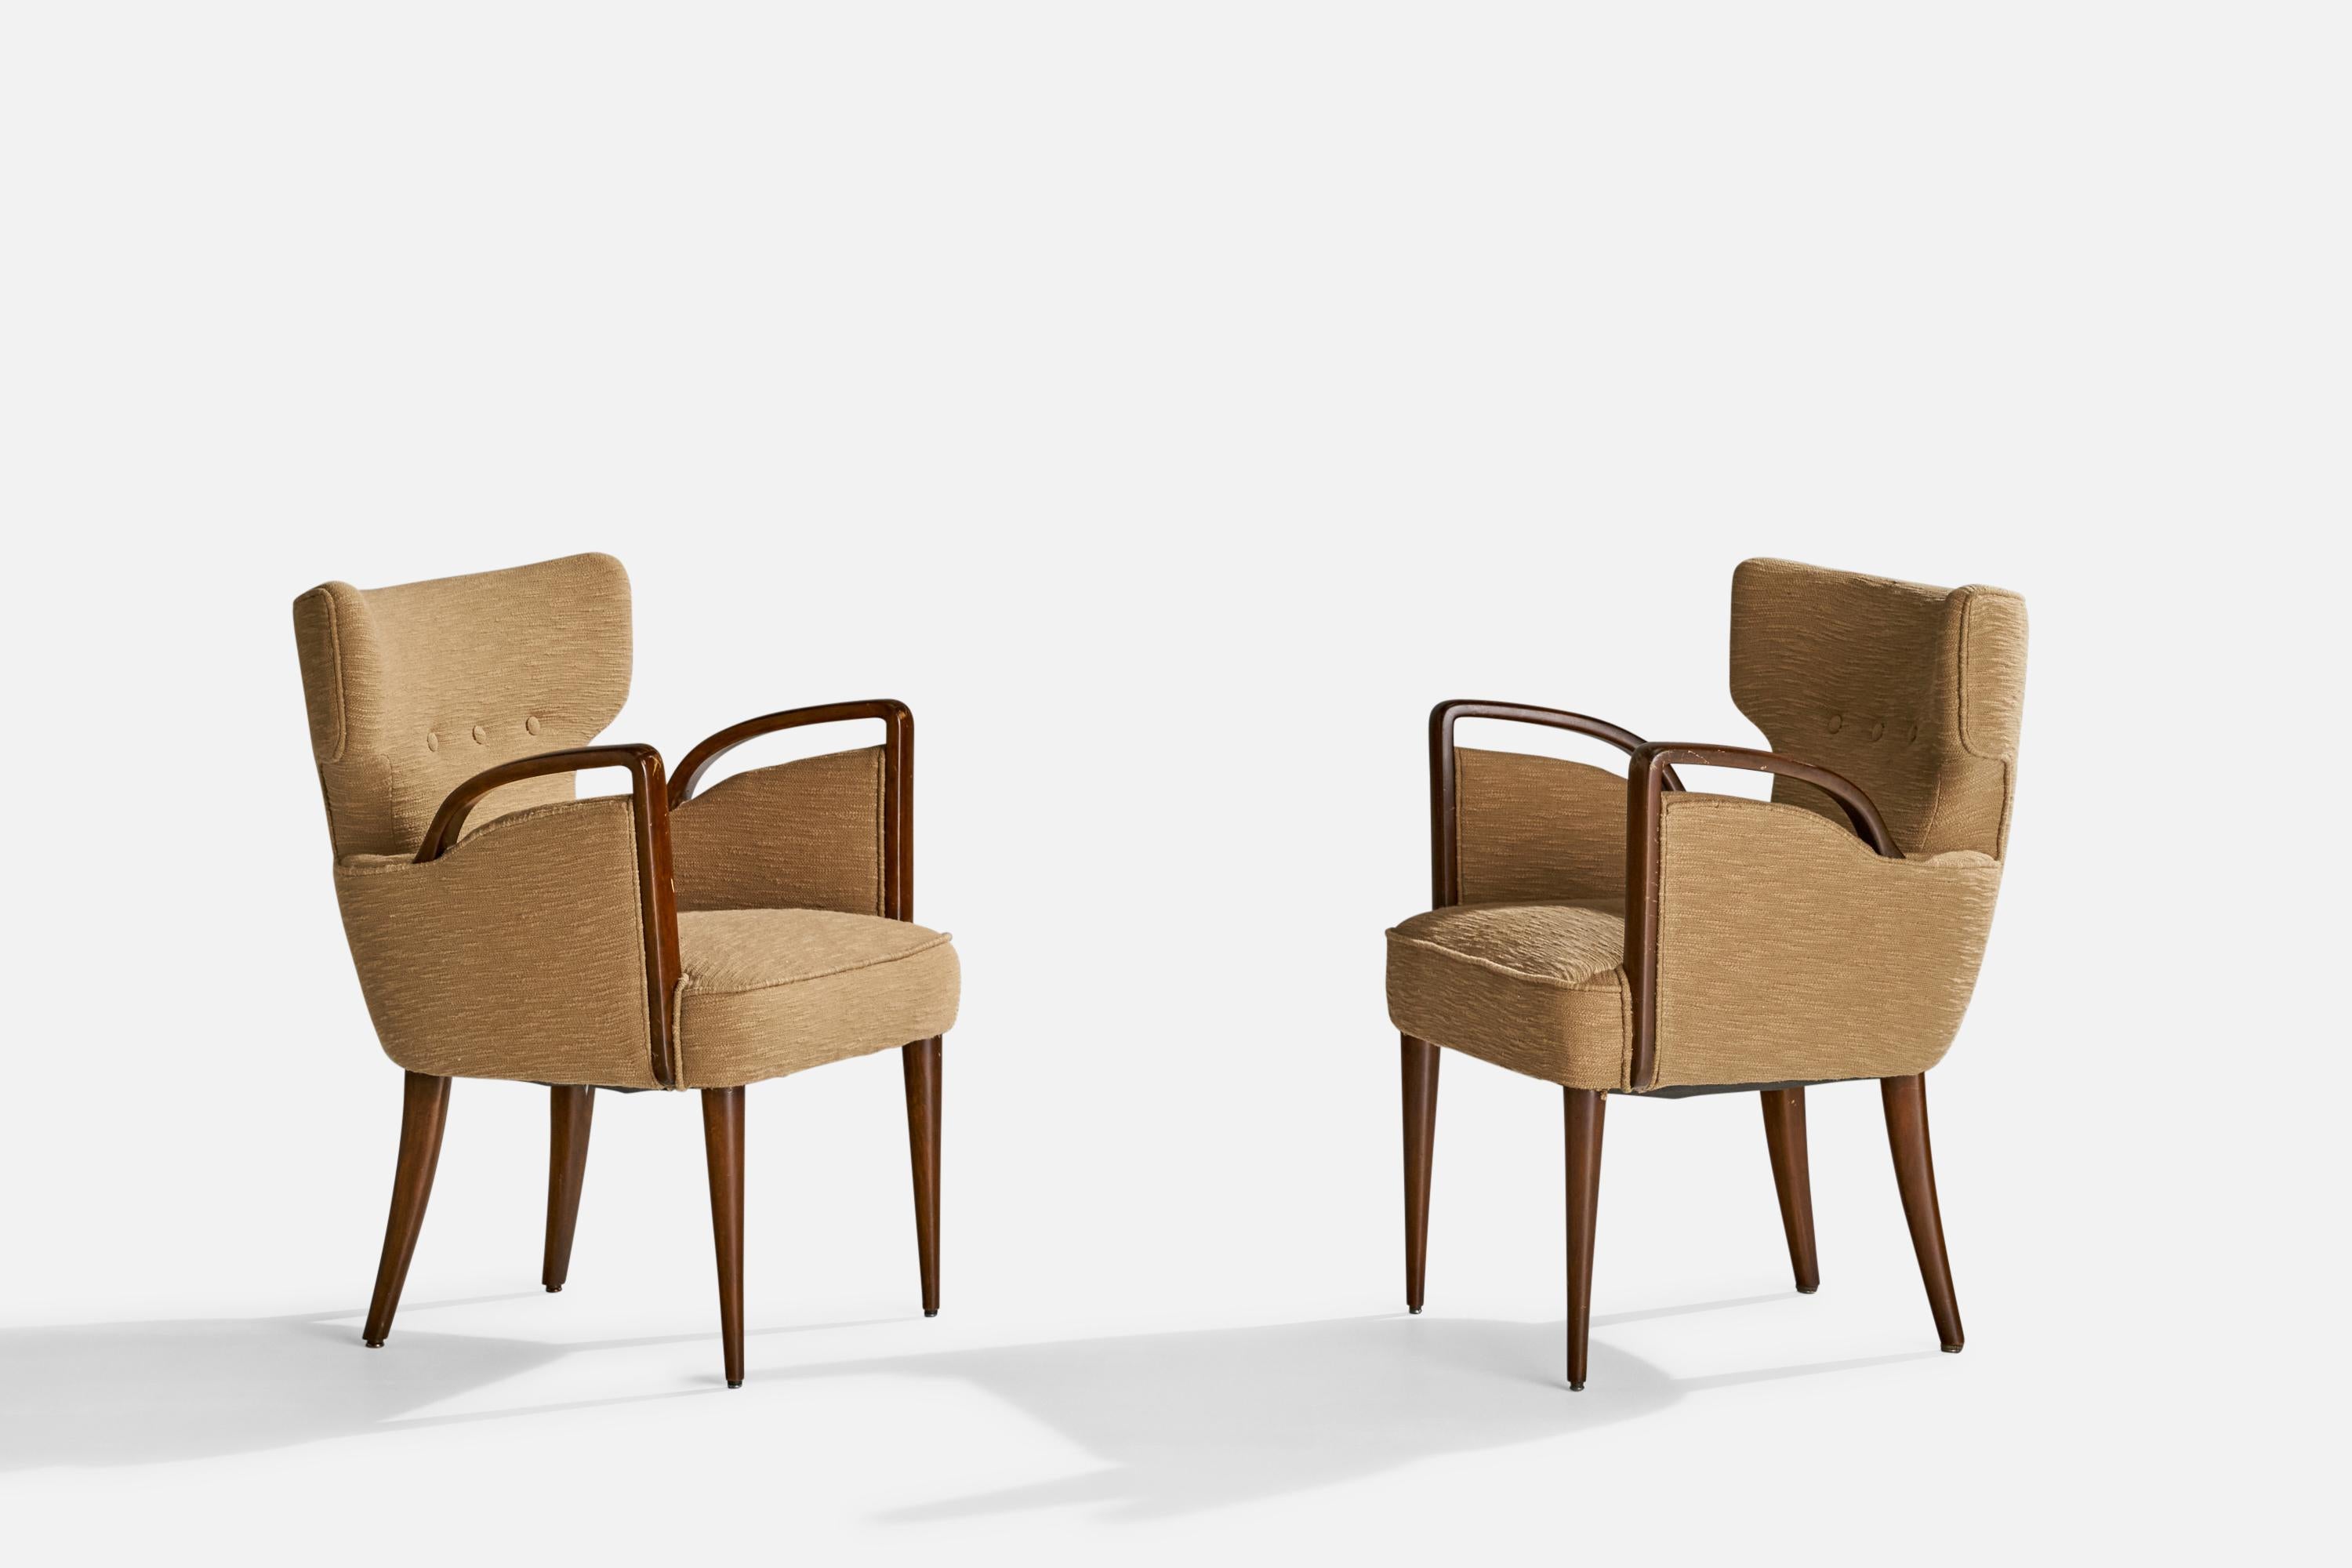 A pair of dark-stained wood and beige fabric armchairs designed by Melchiorre Bega and produced by Figli Di Amadeo Cassina, Italy, c. 1949.

Seat height 17”.